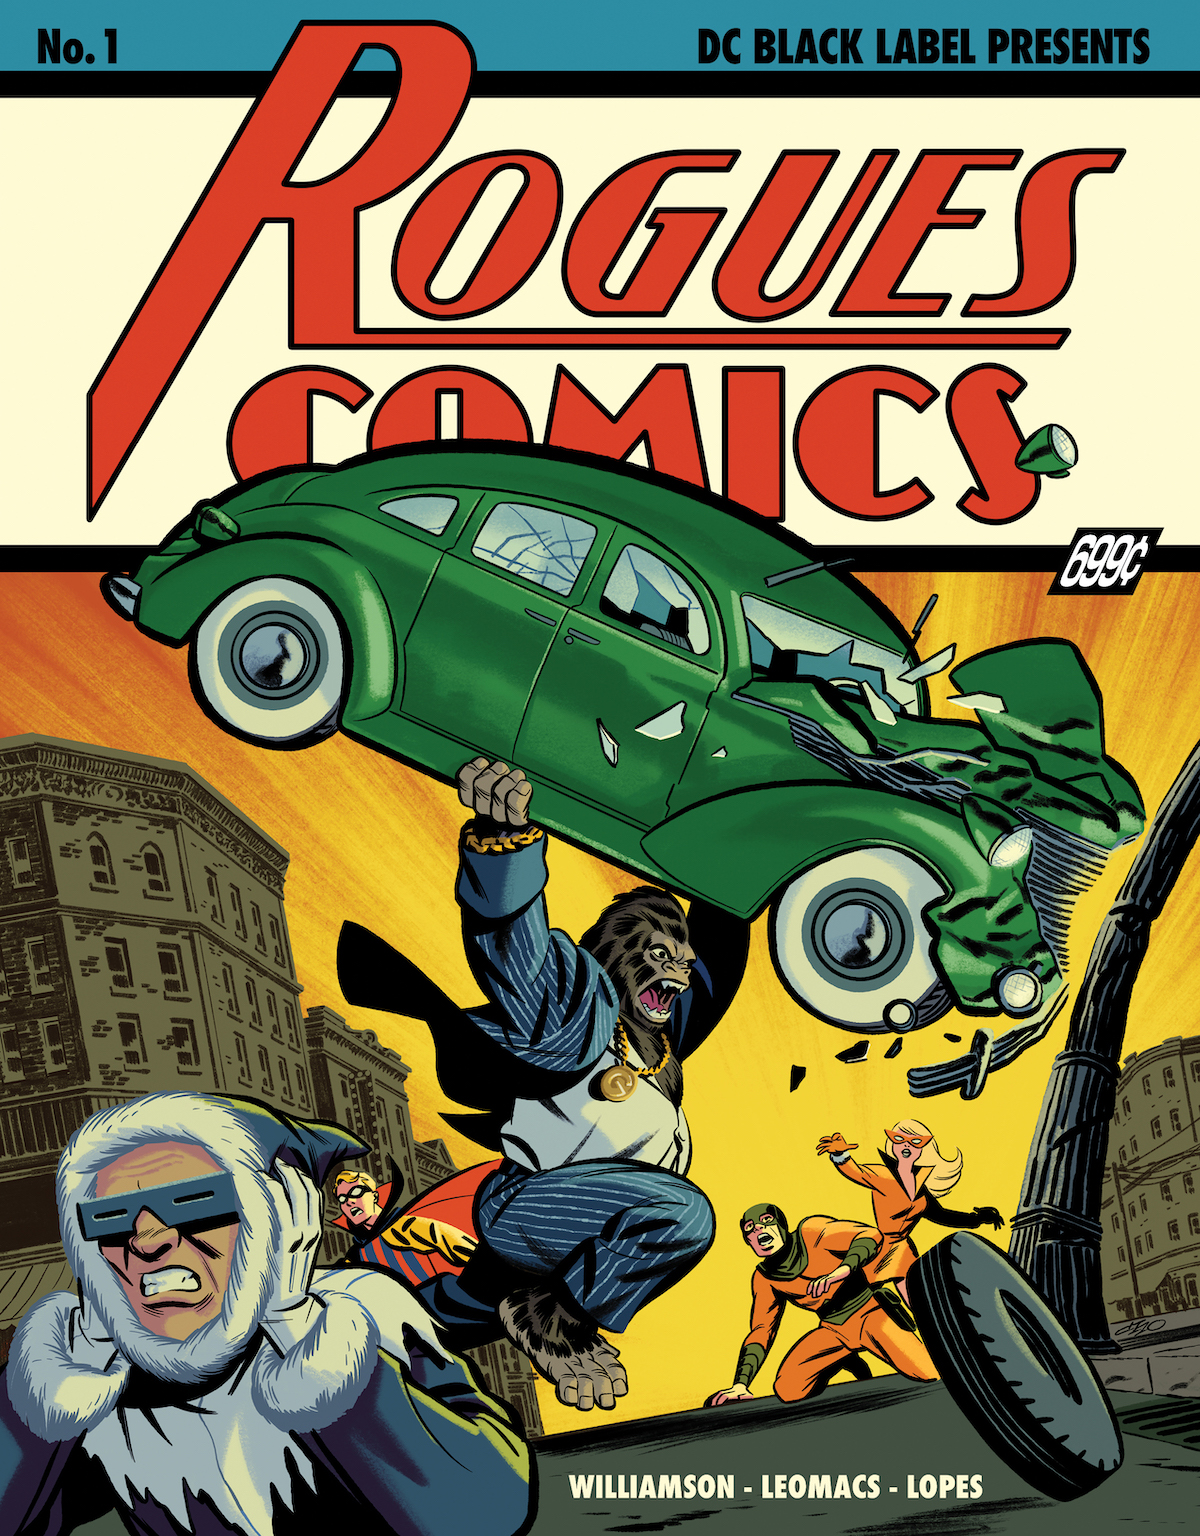 INTERVIEW: Joshua Williamson talks the long path of ROGUES